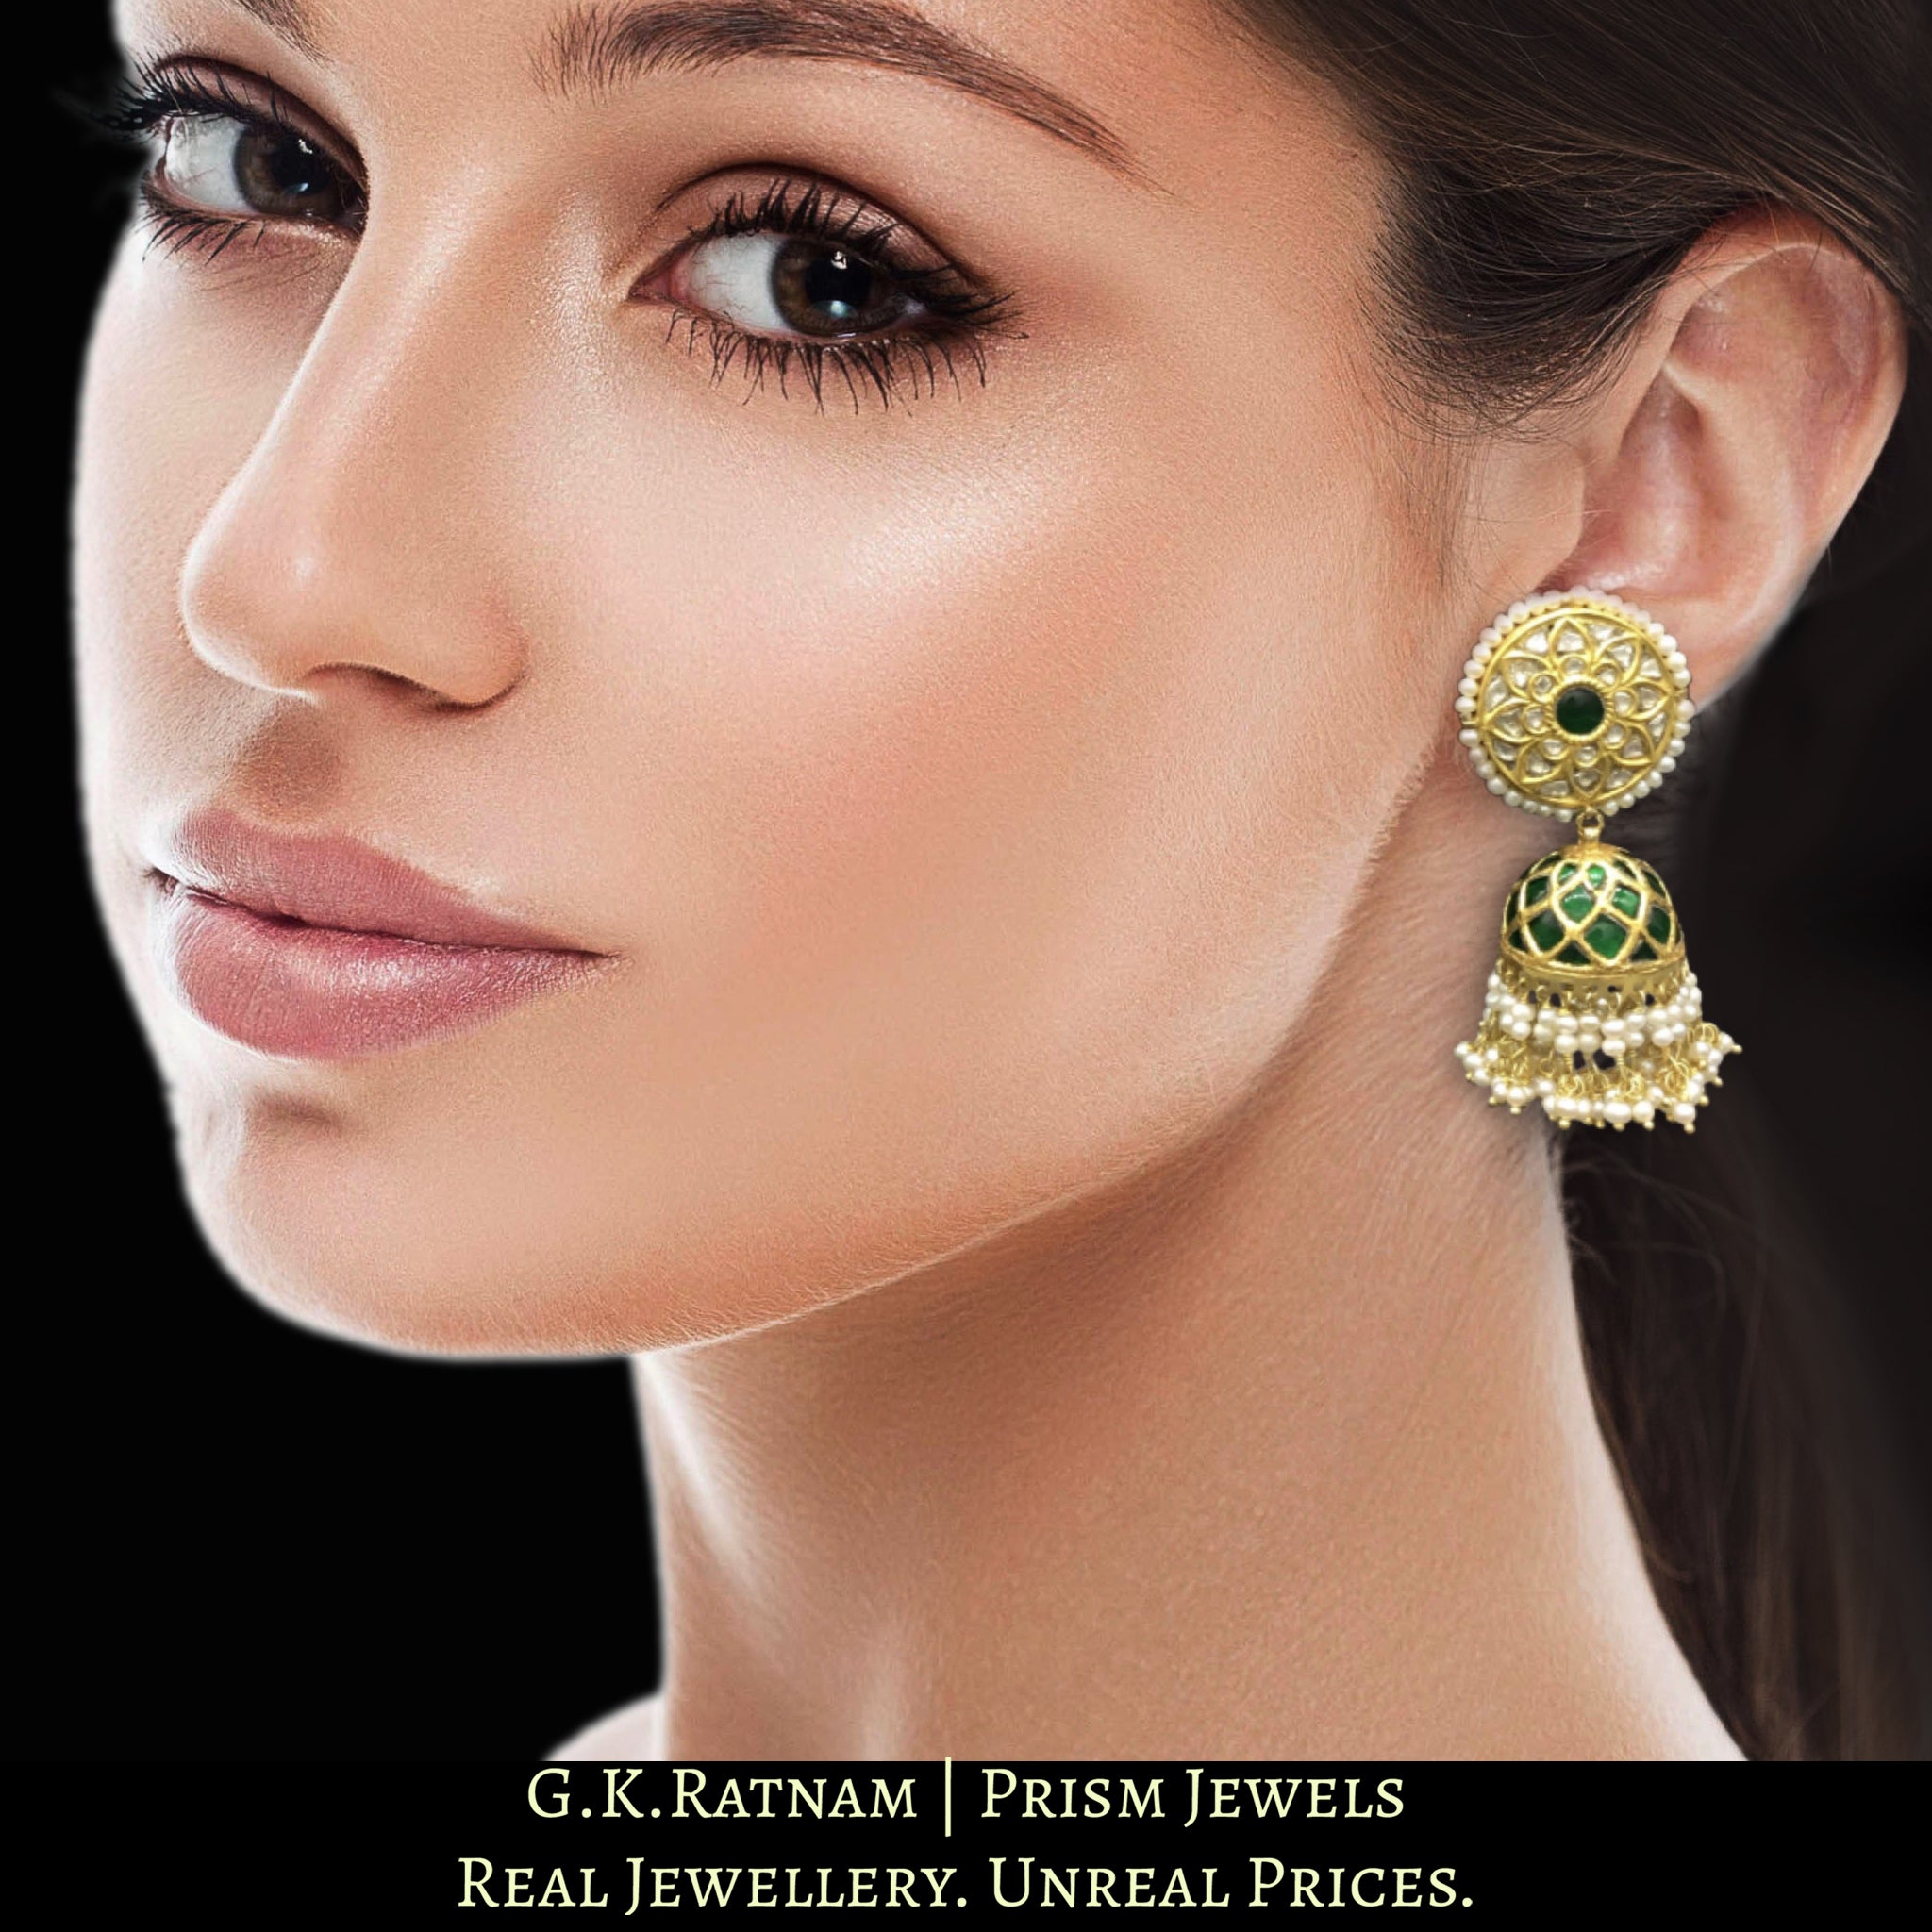 23k Gold and Diamond Polki Jhumki Earrings set with emerald-green stones and enhanced with Freshwater Pearls